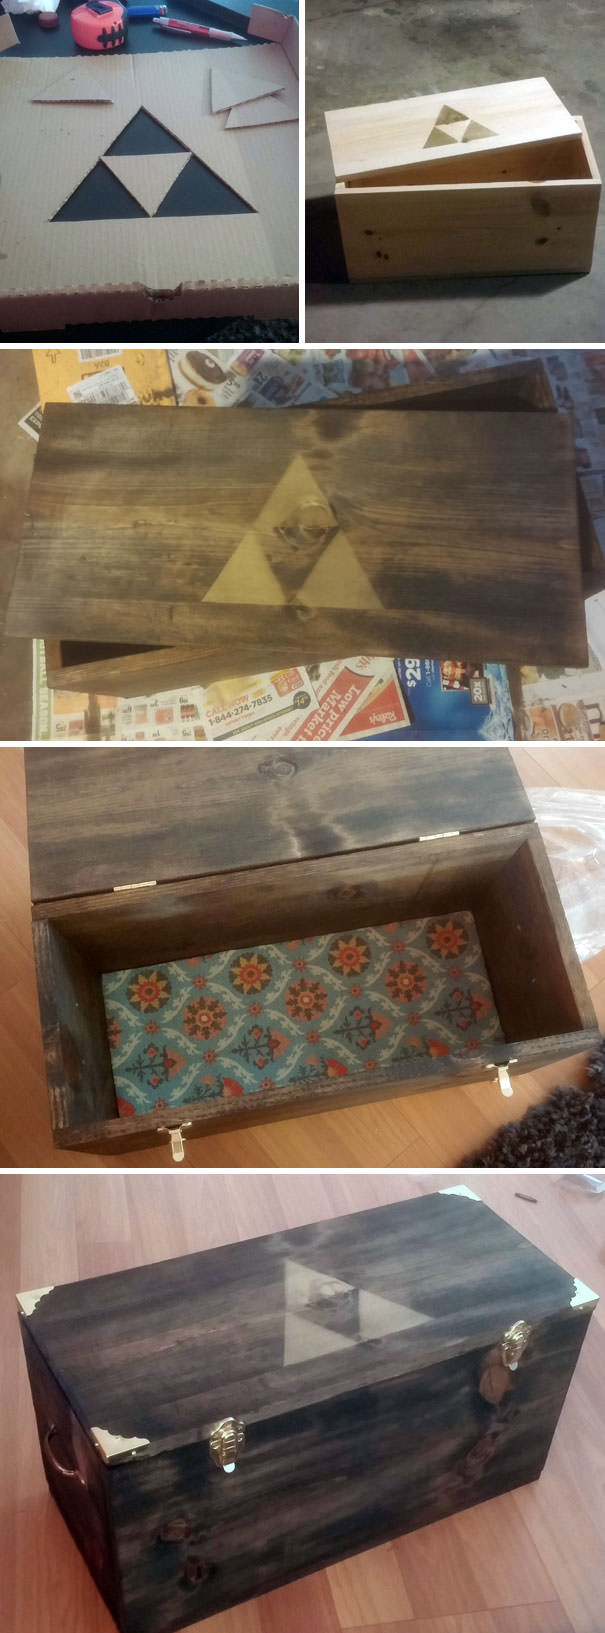 Triforce chest I made for my girlfriend to hold her art supplies.